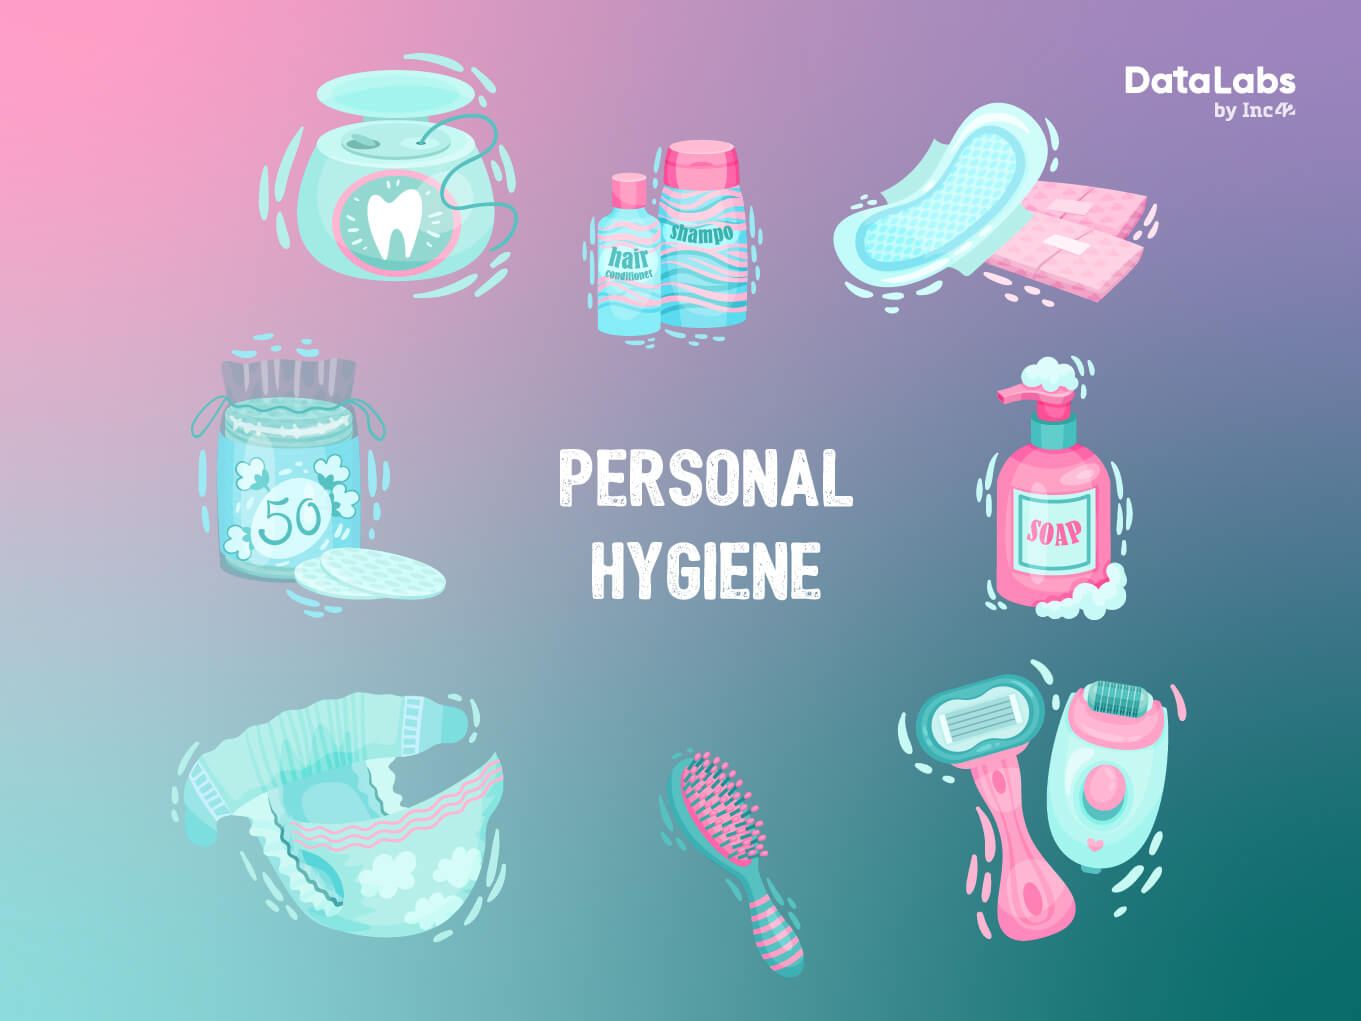 Personal Hygiene Market Opportunity in India